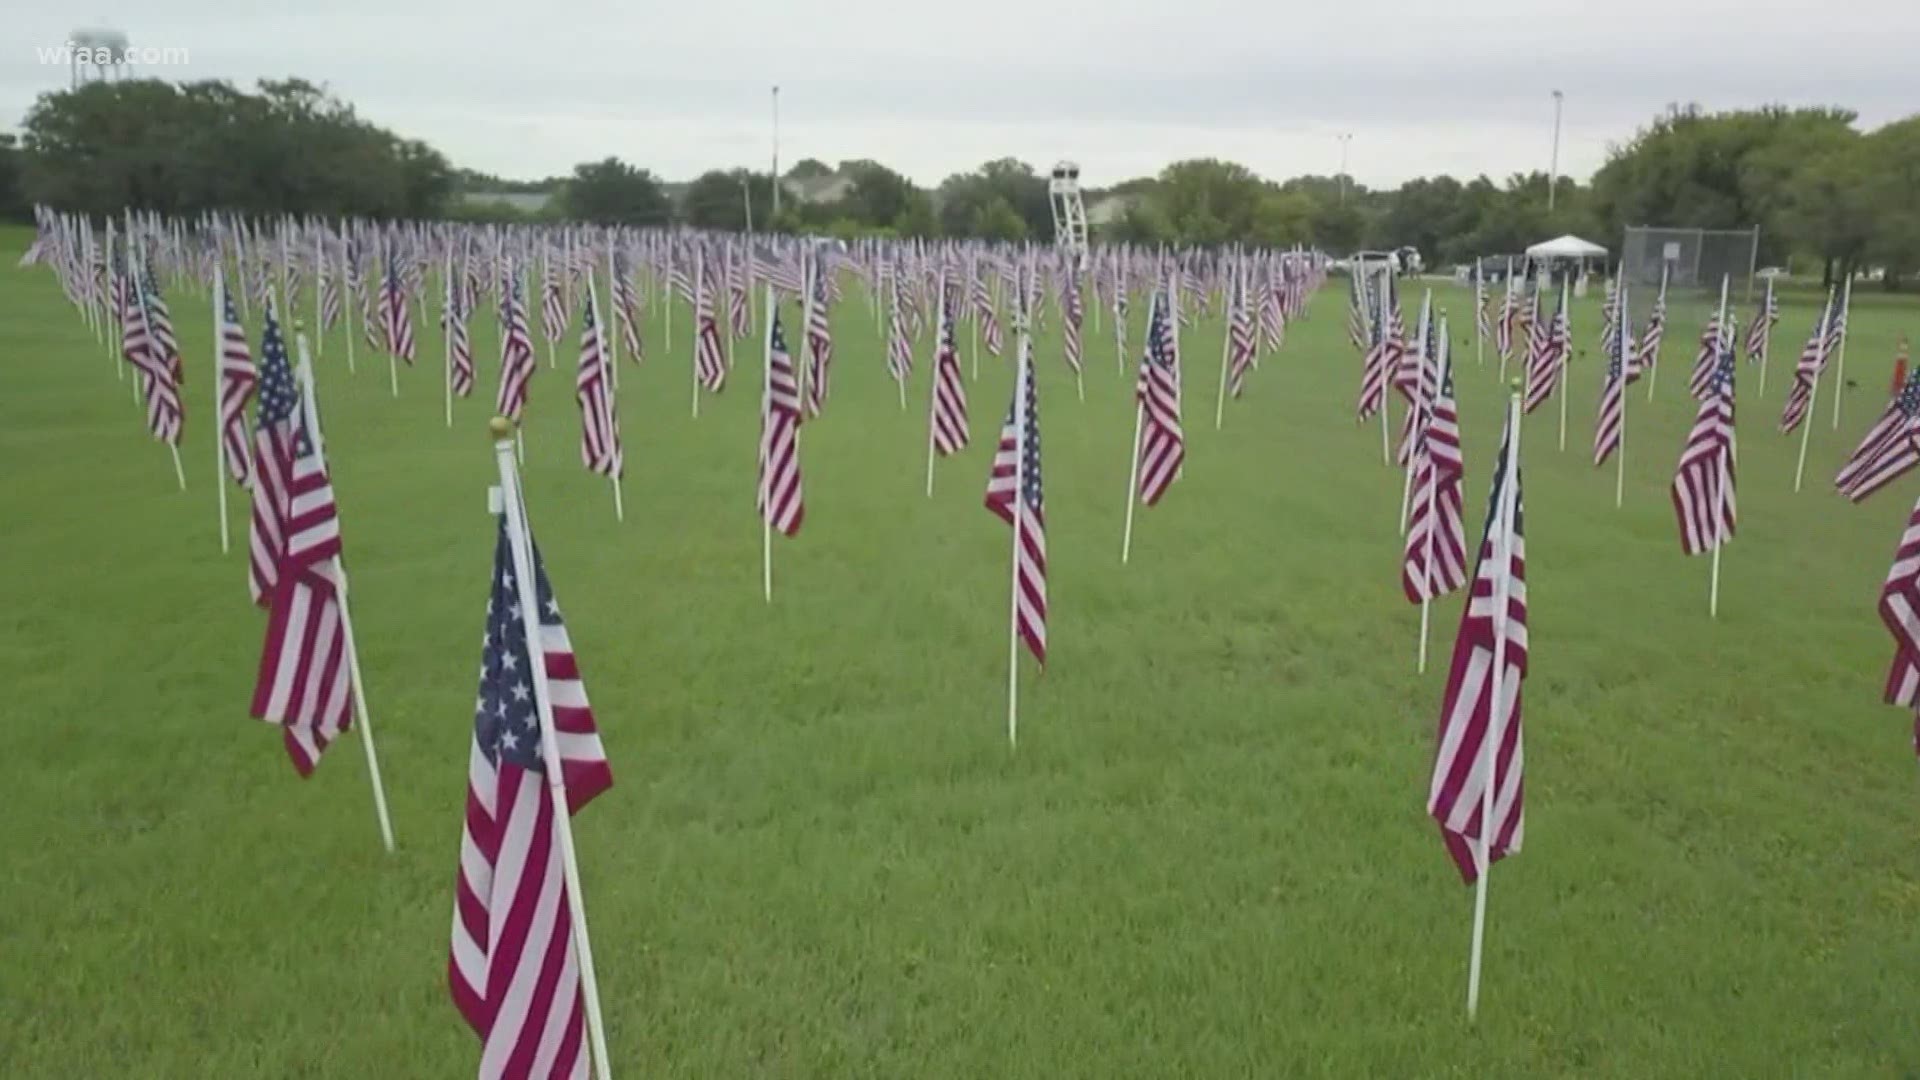 Across the country, ceremonies are honoring the 2, 977 people who died in the terror attacks on September 11.